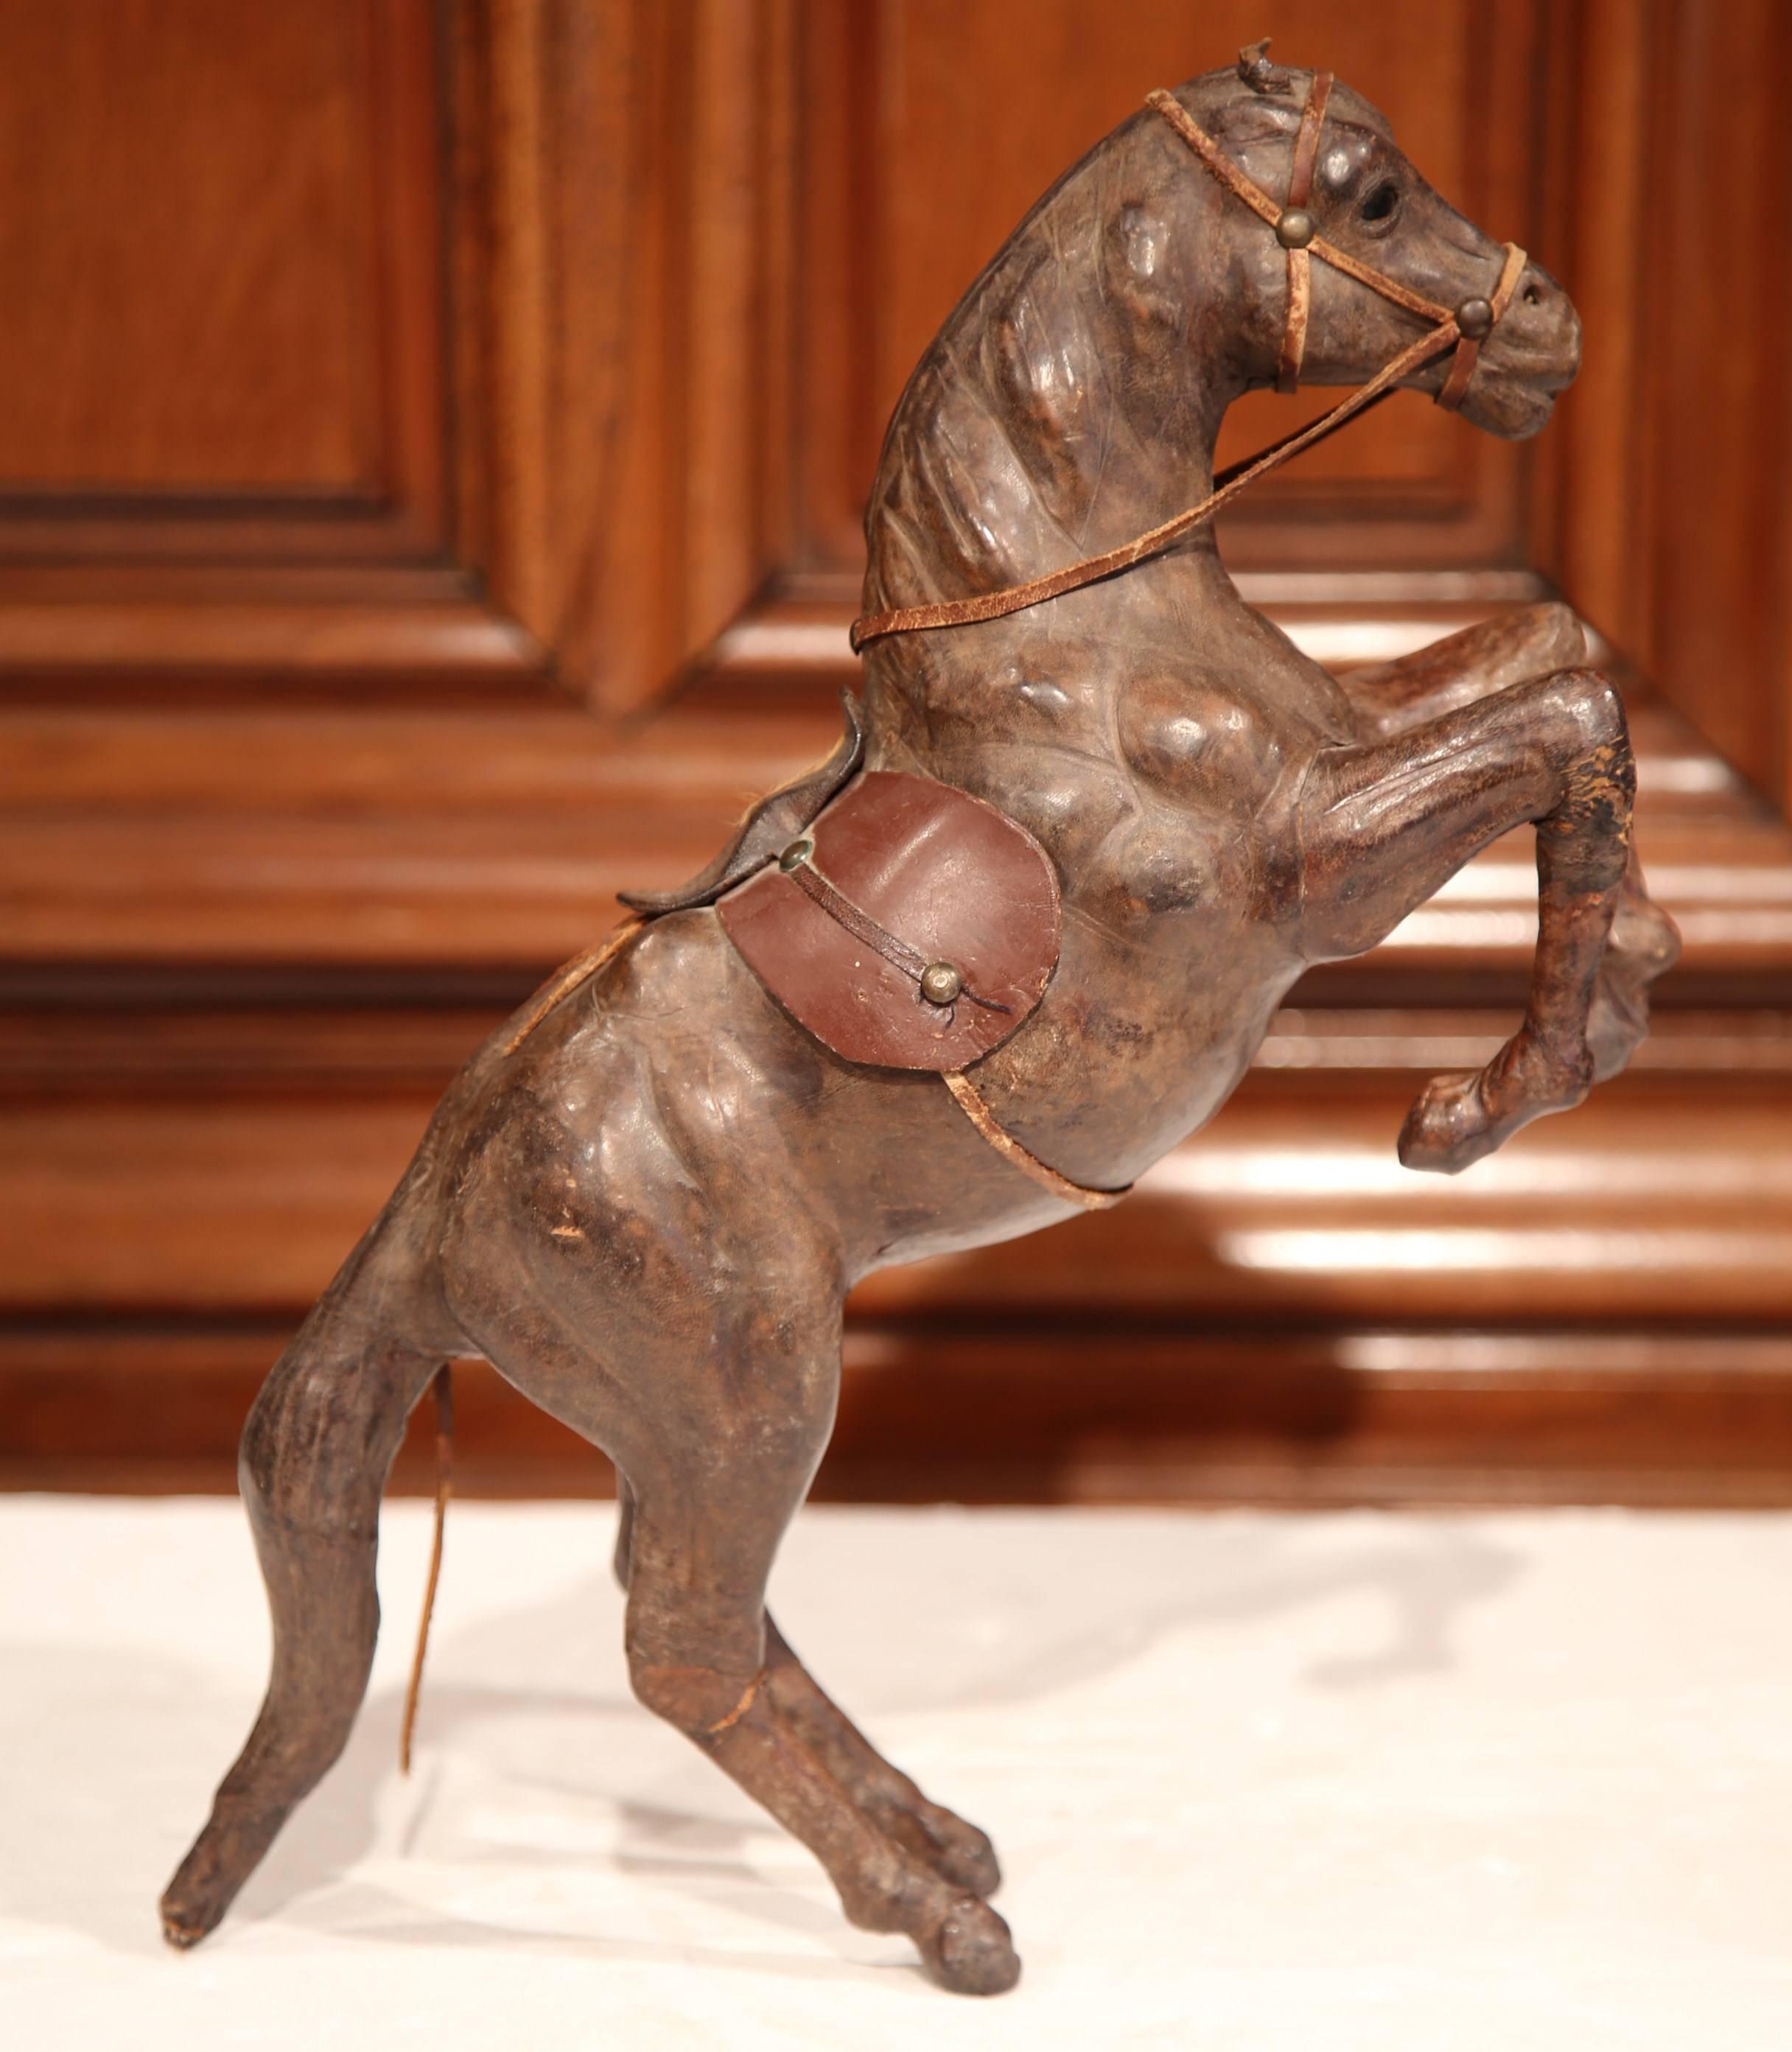 This beautiful, antique horse sculpture was crafted in France, circa 1880. The rearing horse figure stands on his back legs and is dressed in traditional equestrian dressage accessories including a halter, bridle and saddle. The detailed leather